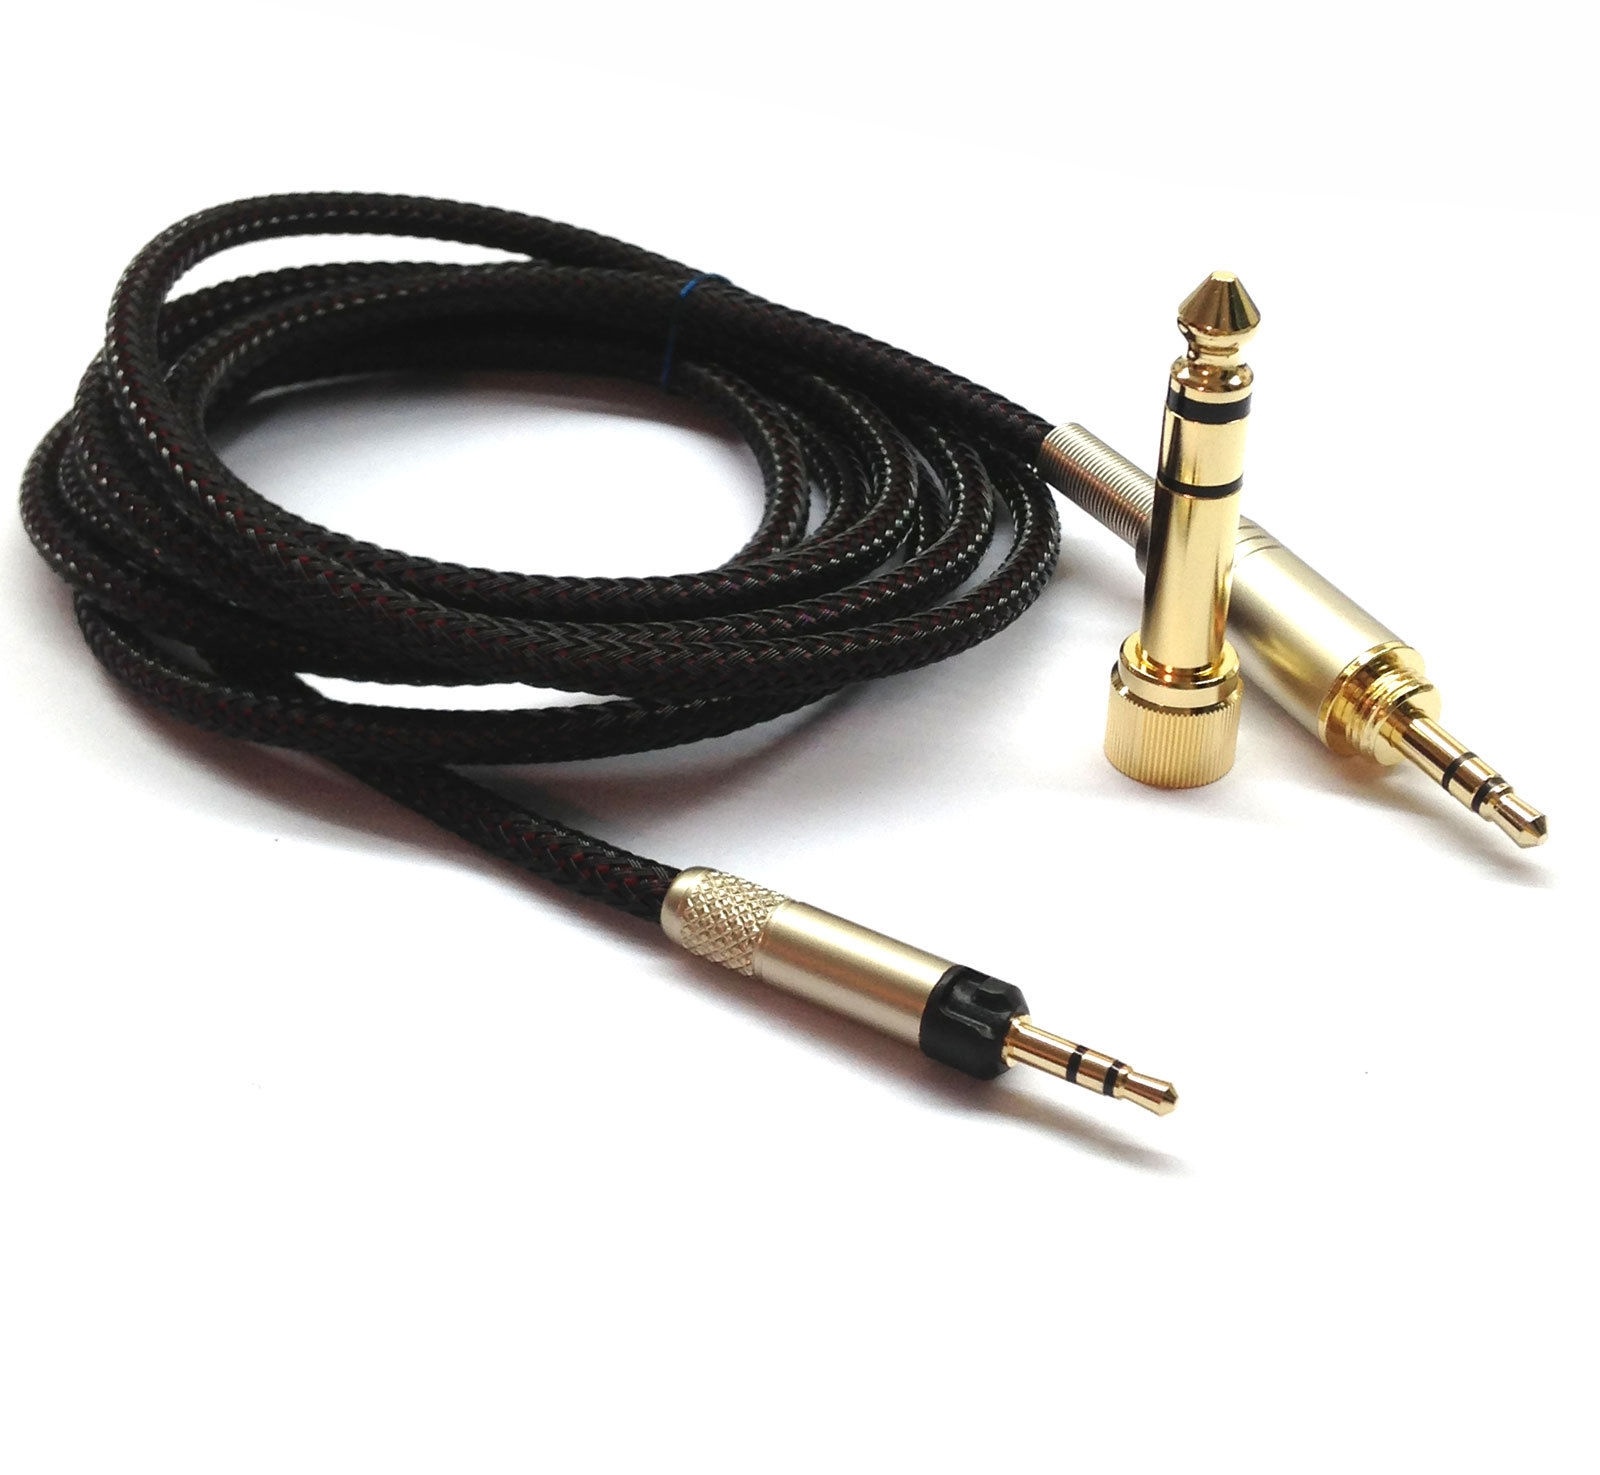 Braided Replacement Cable For Sennheiser HD598 HD558 HD518 Headphones (1.2m)